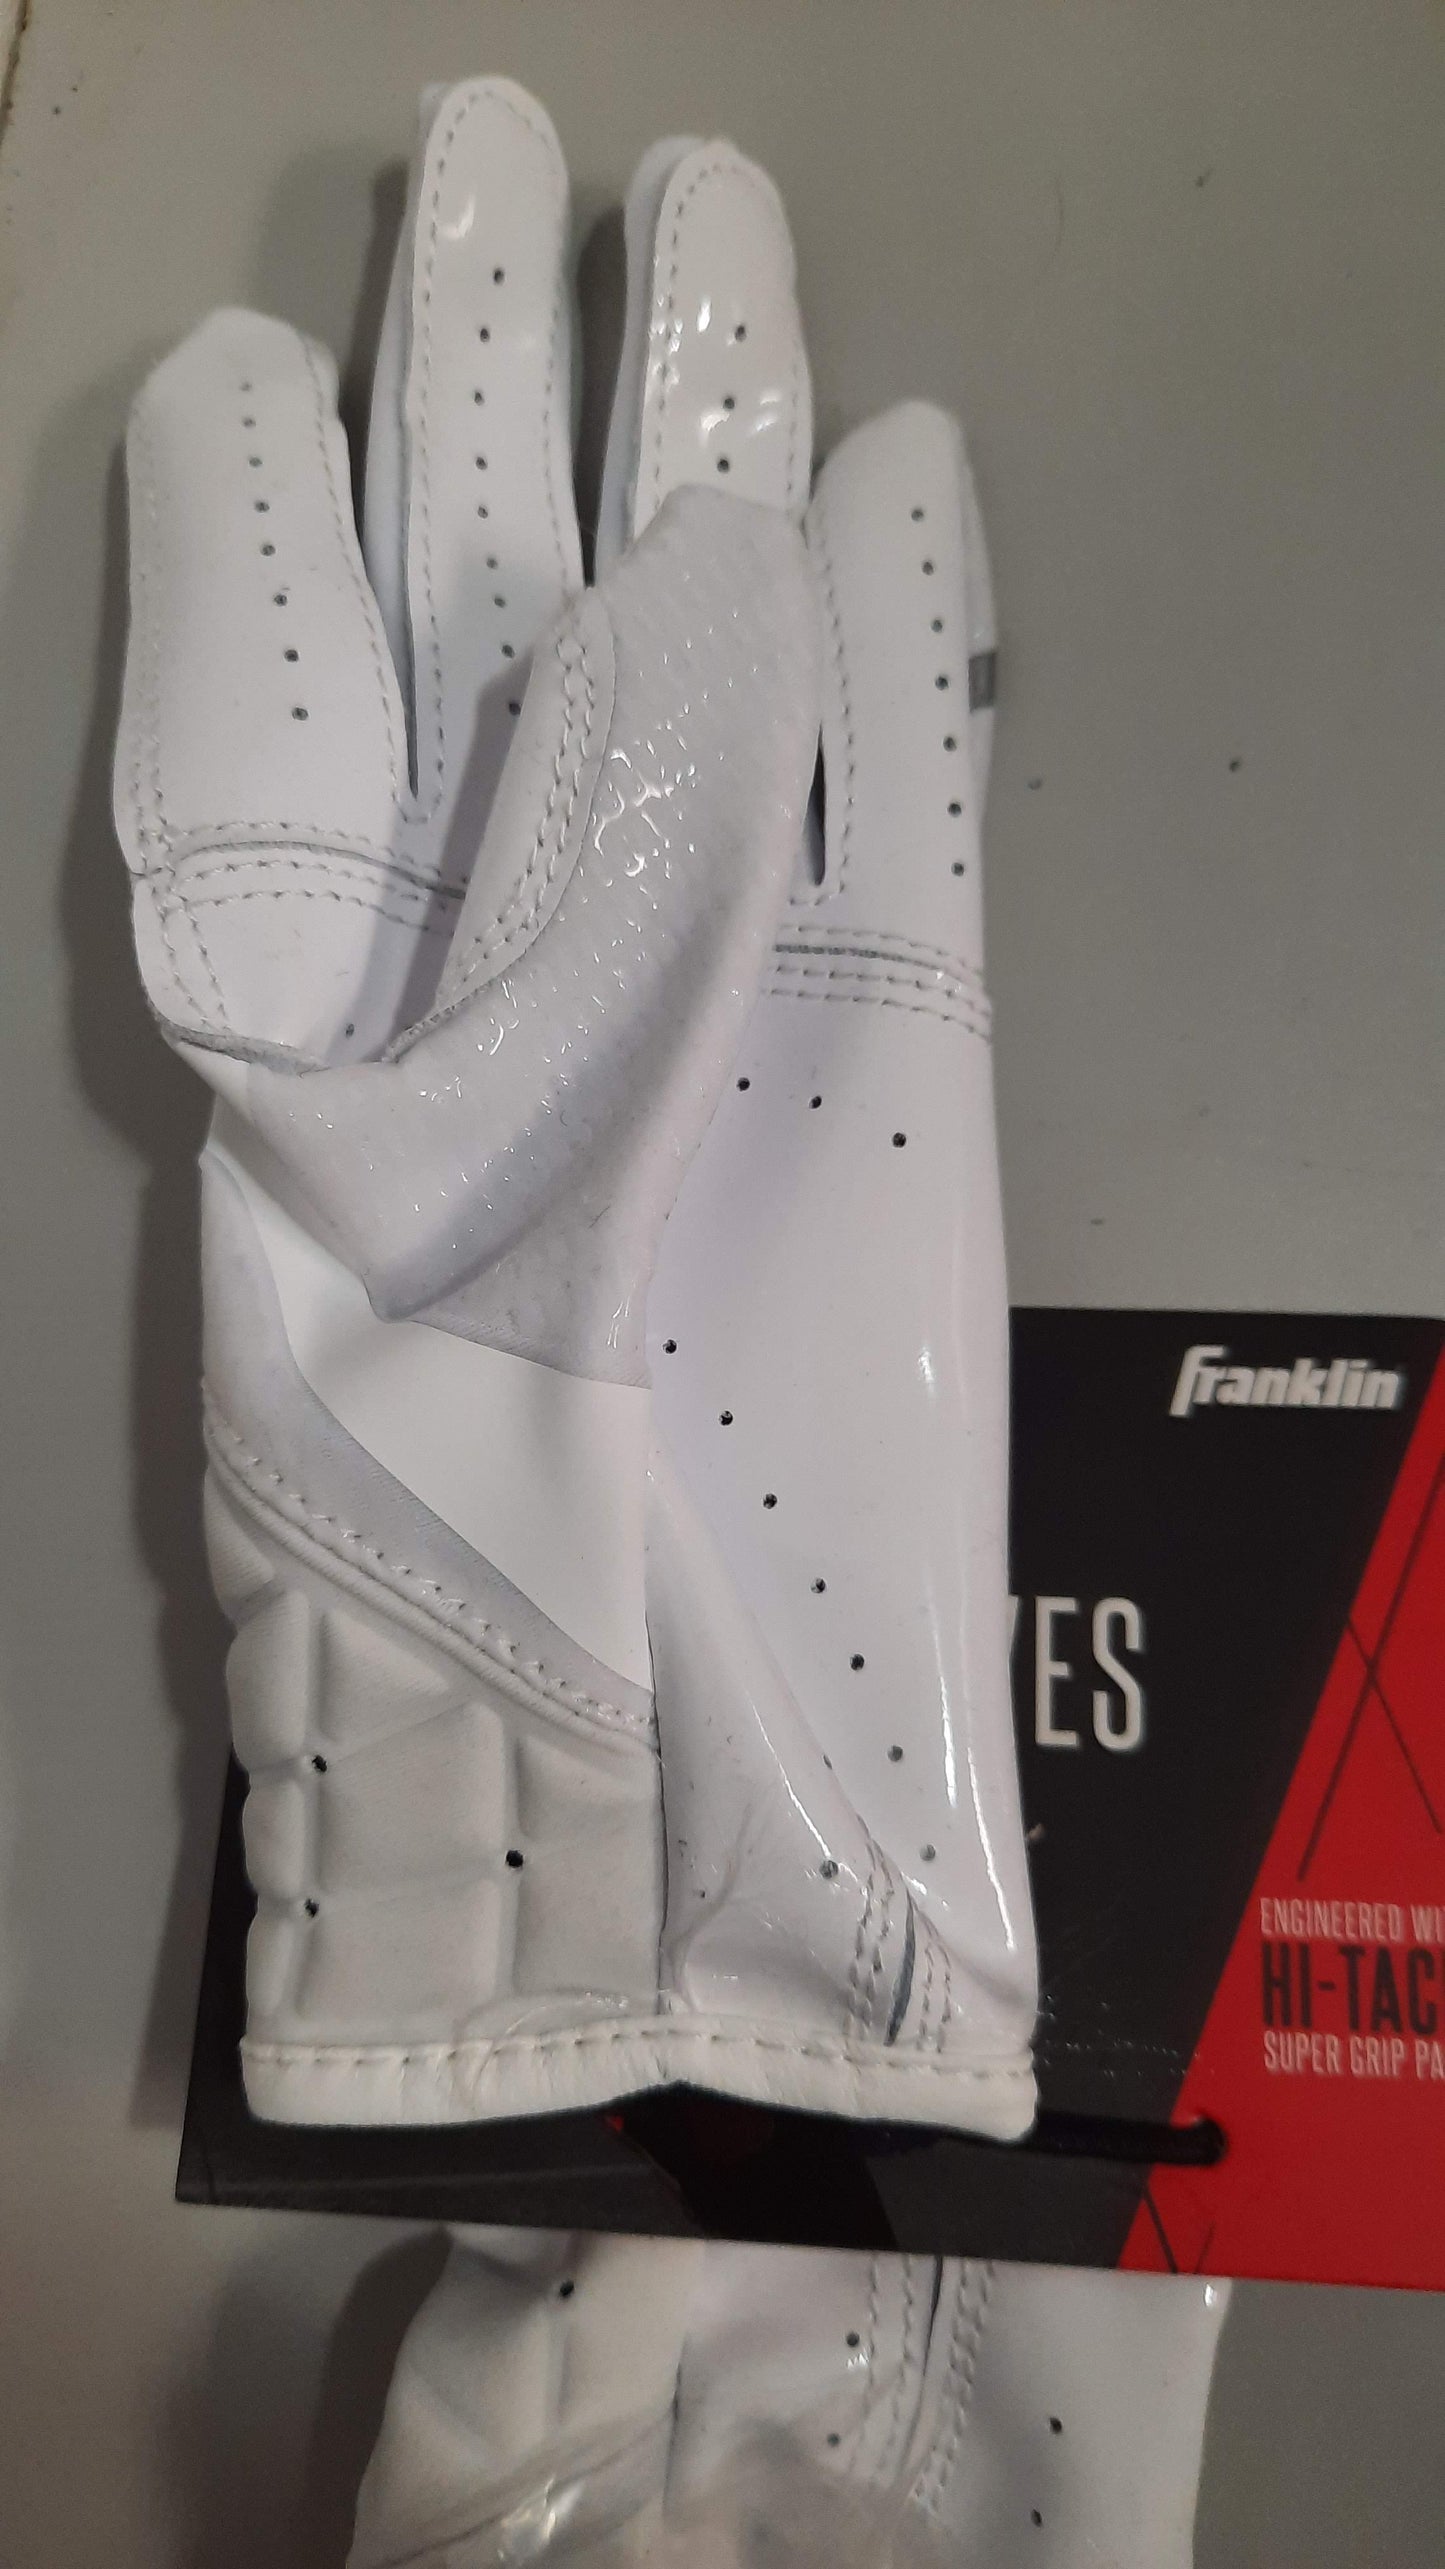 Franklin Receiver Football Gloves 1 Pair Stick Size Youth Small White New